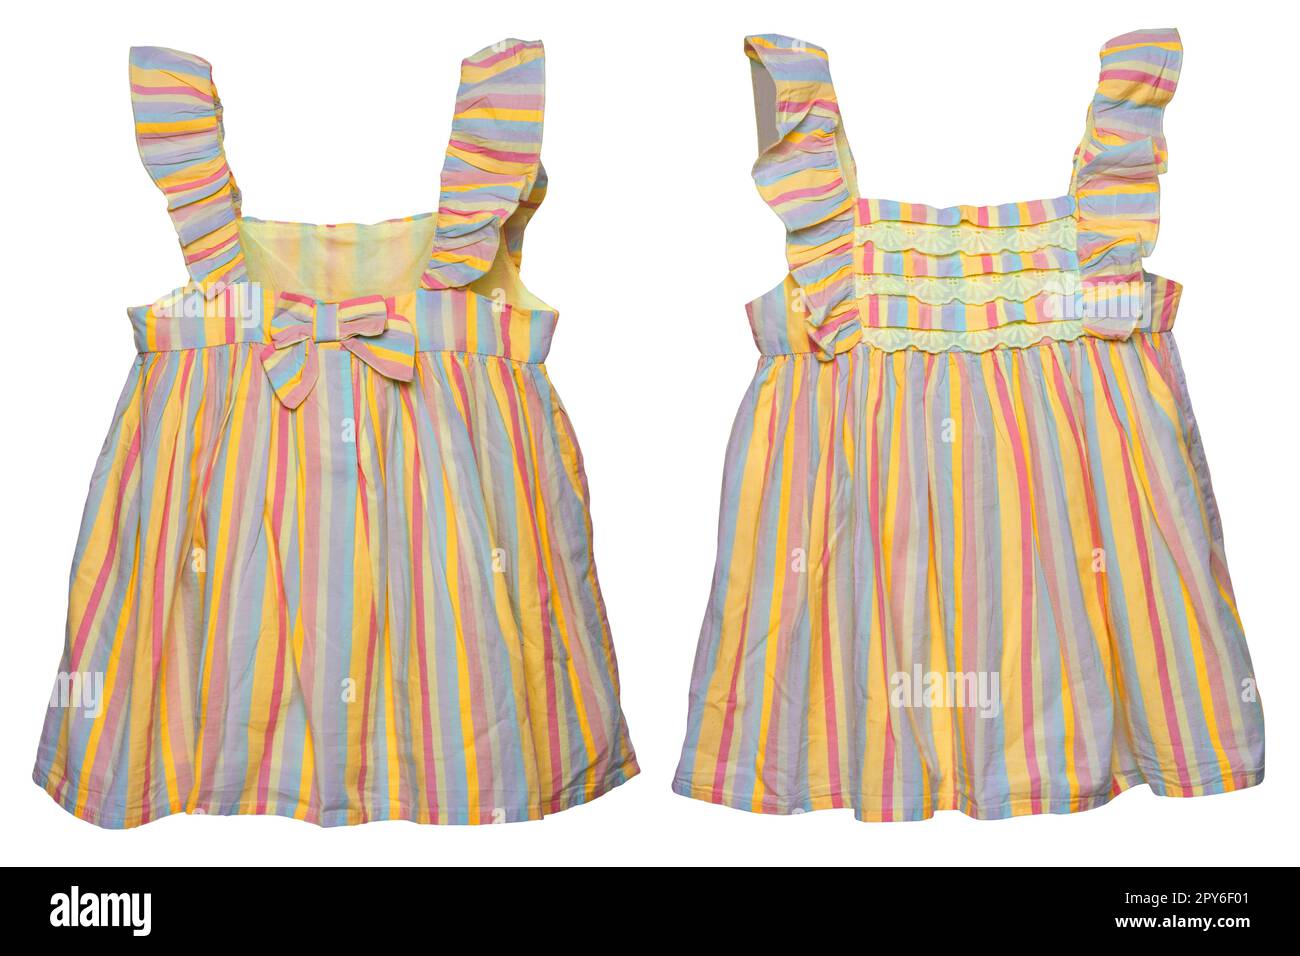 Summer dress isolated. Closeup of a colorful striped sleeveless baby girl dress isolated on a white background. Children spring fashion. Front and back view. Stock Photo